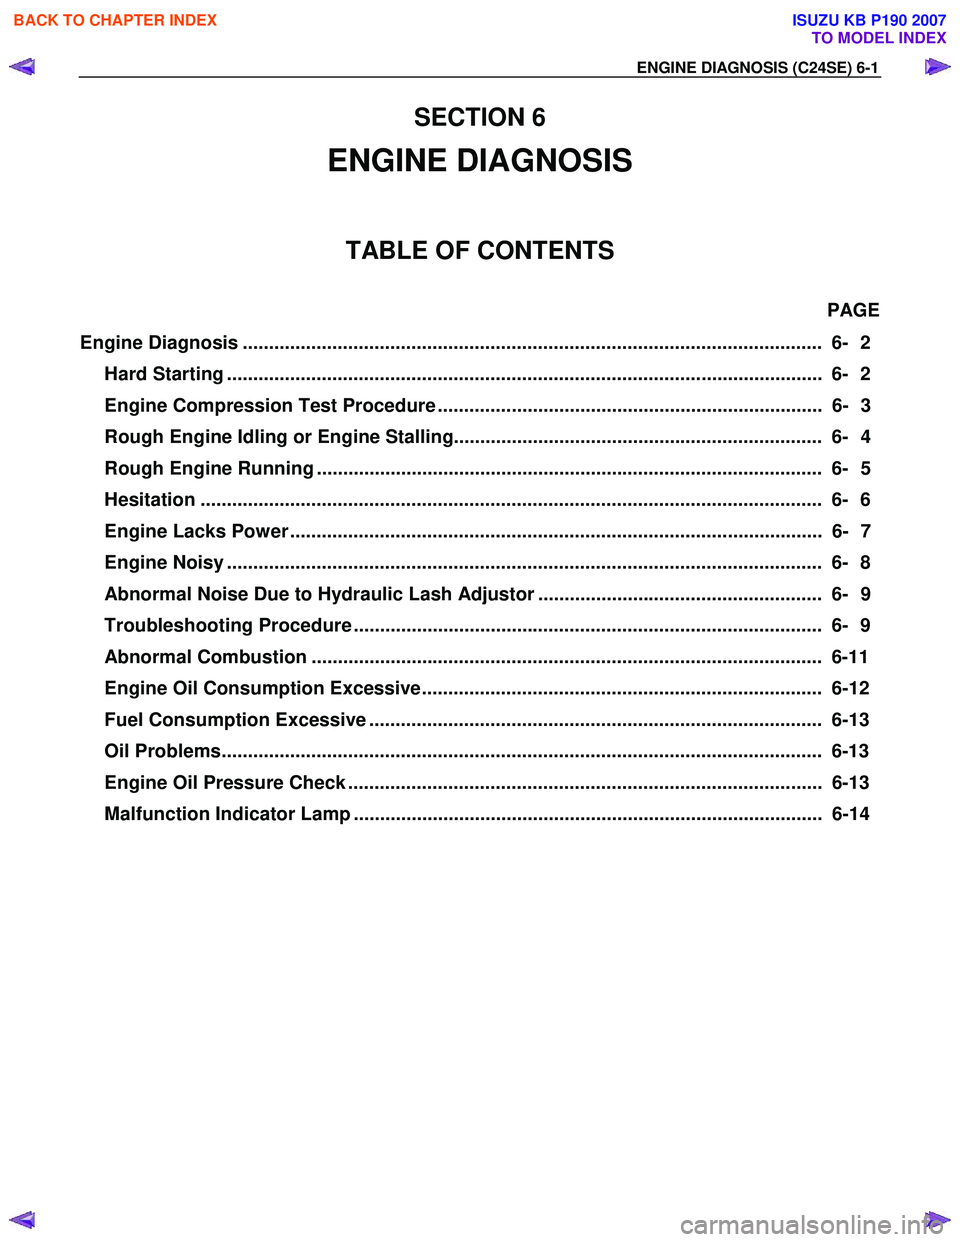 ISUZU KB P190 2007  Workshop User Guide ENGINE DIAGNOSIS (C24SE) 6-1 
SECTION 6 
ENGINE DIAGNOSIS 
TABLE OF CONTENTS 
PAGE 
Engine Diagnosis ...................................................................................................